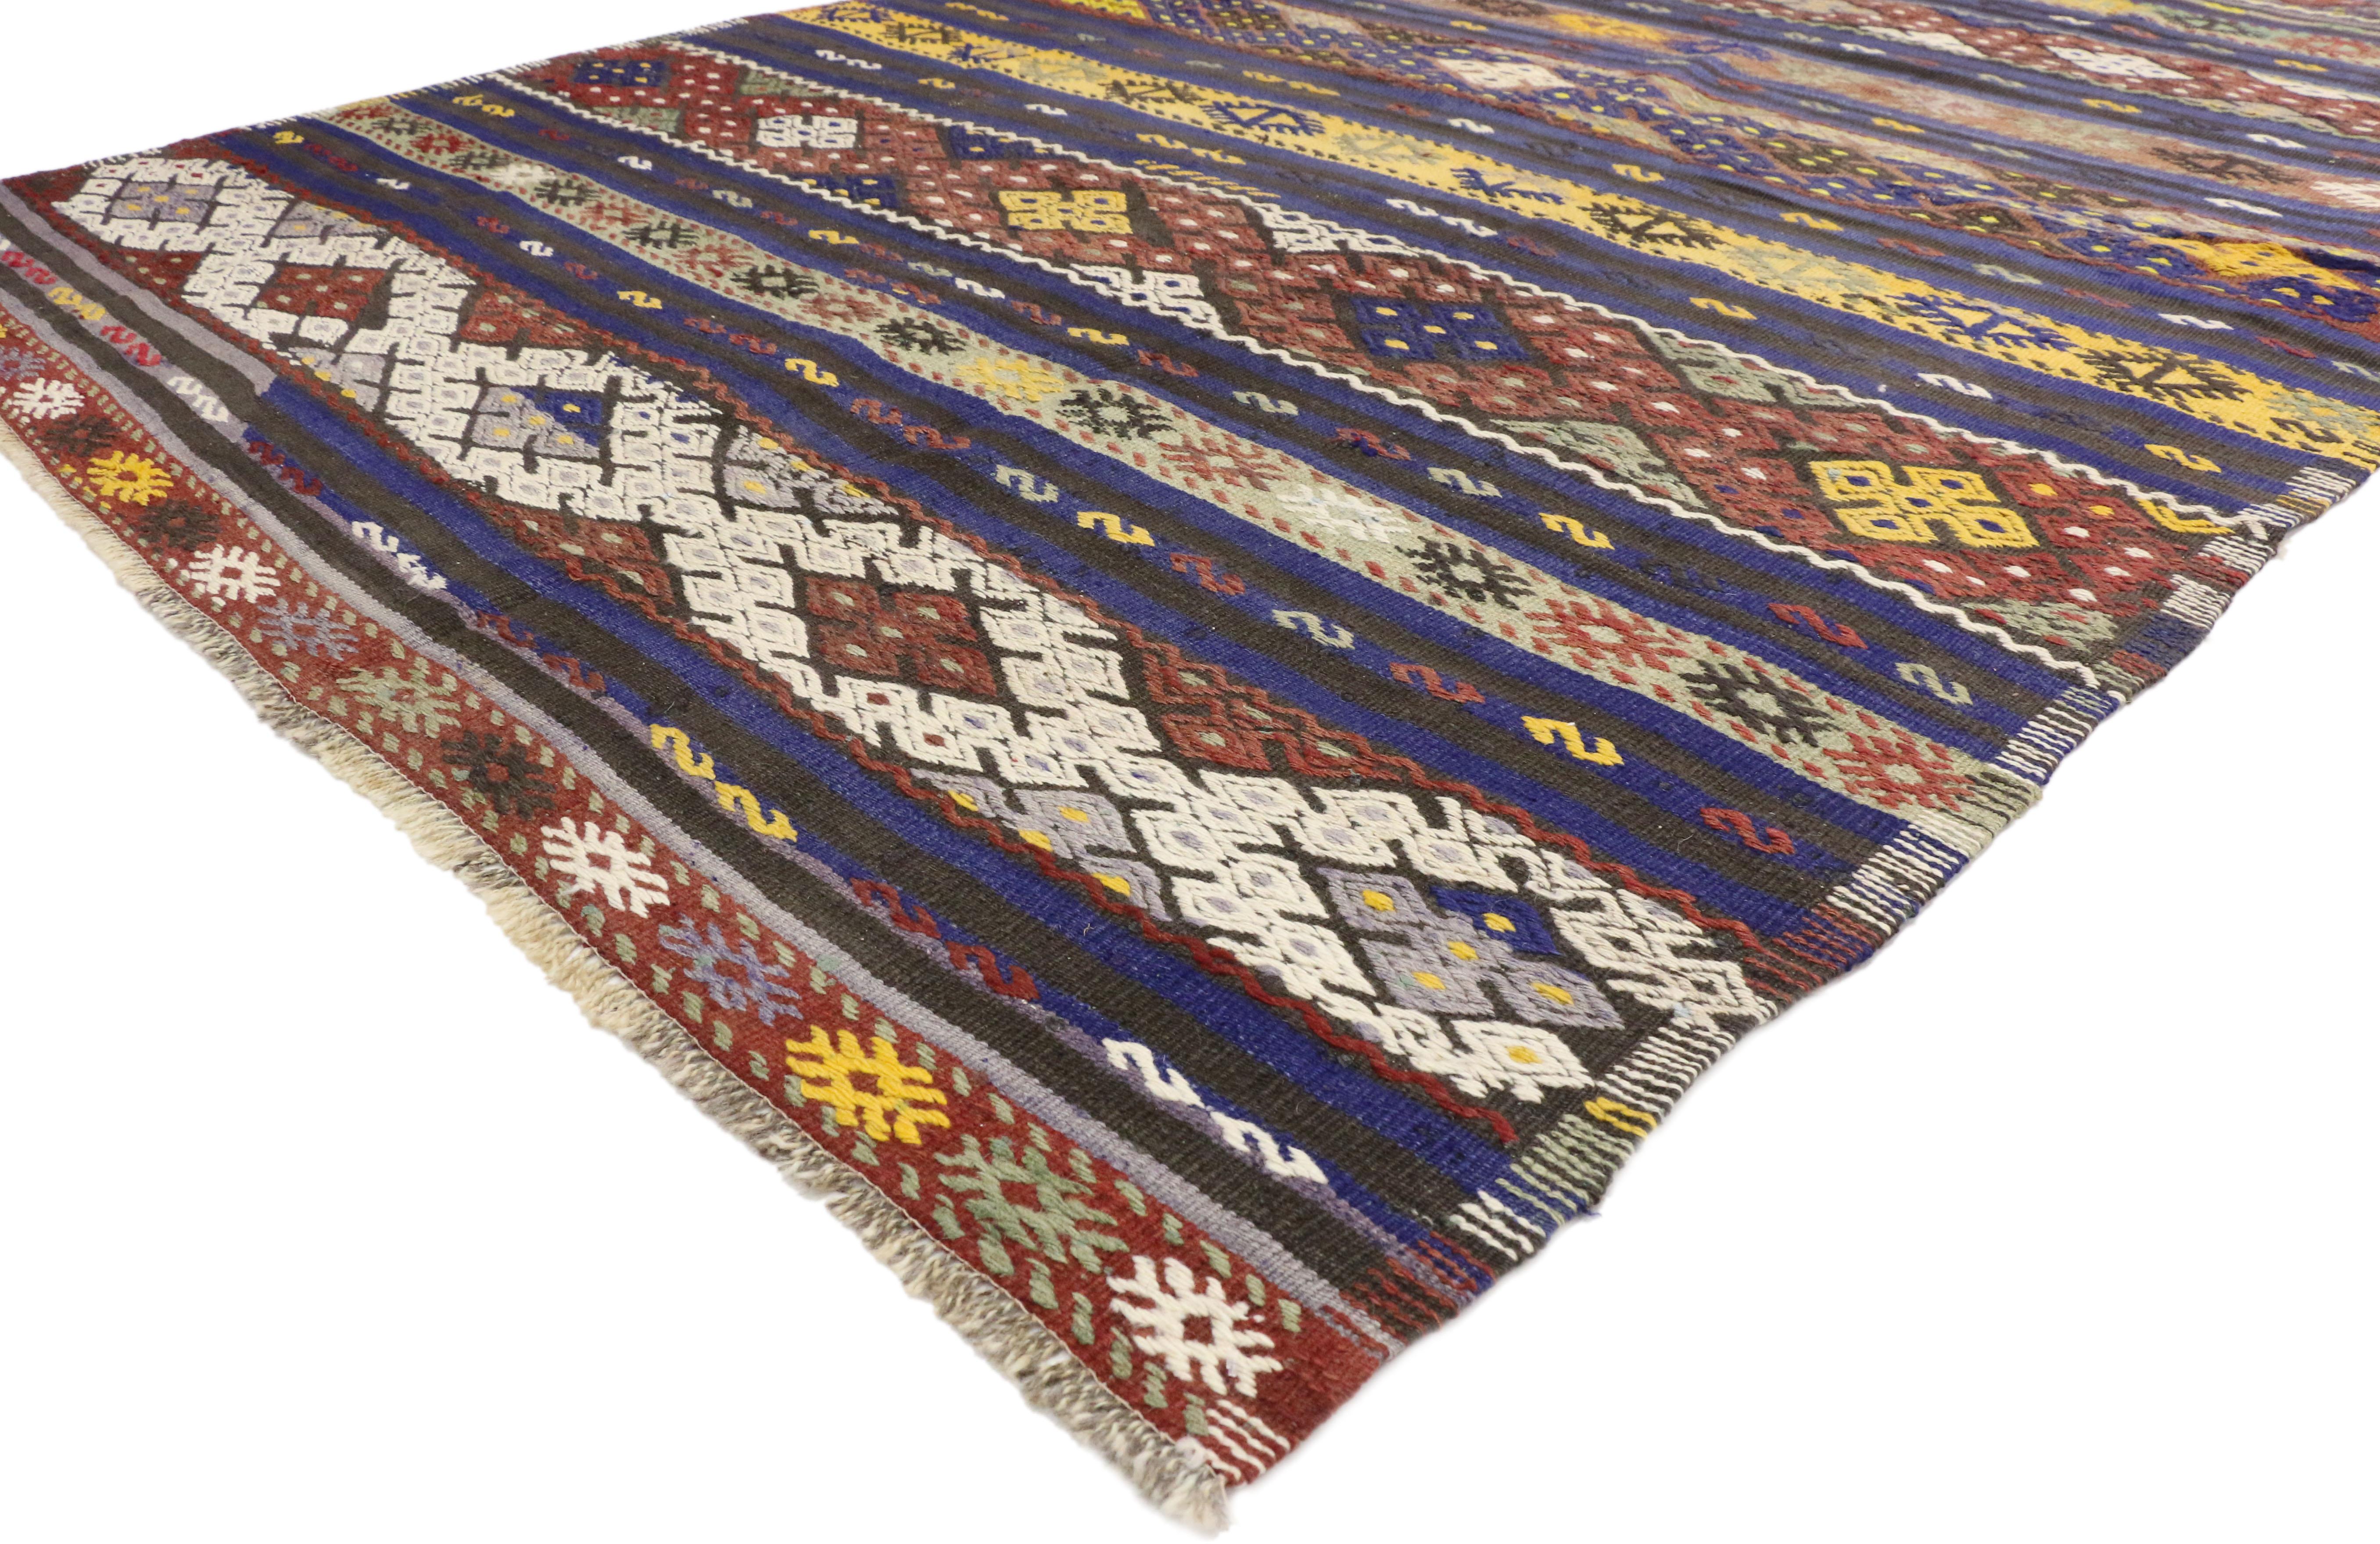 51337, vintage Turkish Kilim Striped rug with Bohemian Tribal style, flat-weave rug. This handwoven wool vintage Turkish Kilim rug features multi-color geometric tribal motifs and stripes. This Kilim rug is rich in Turkish culture, as the symbolic